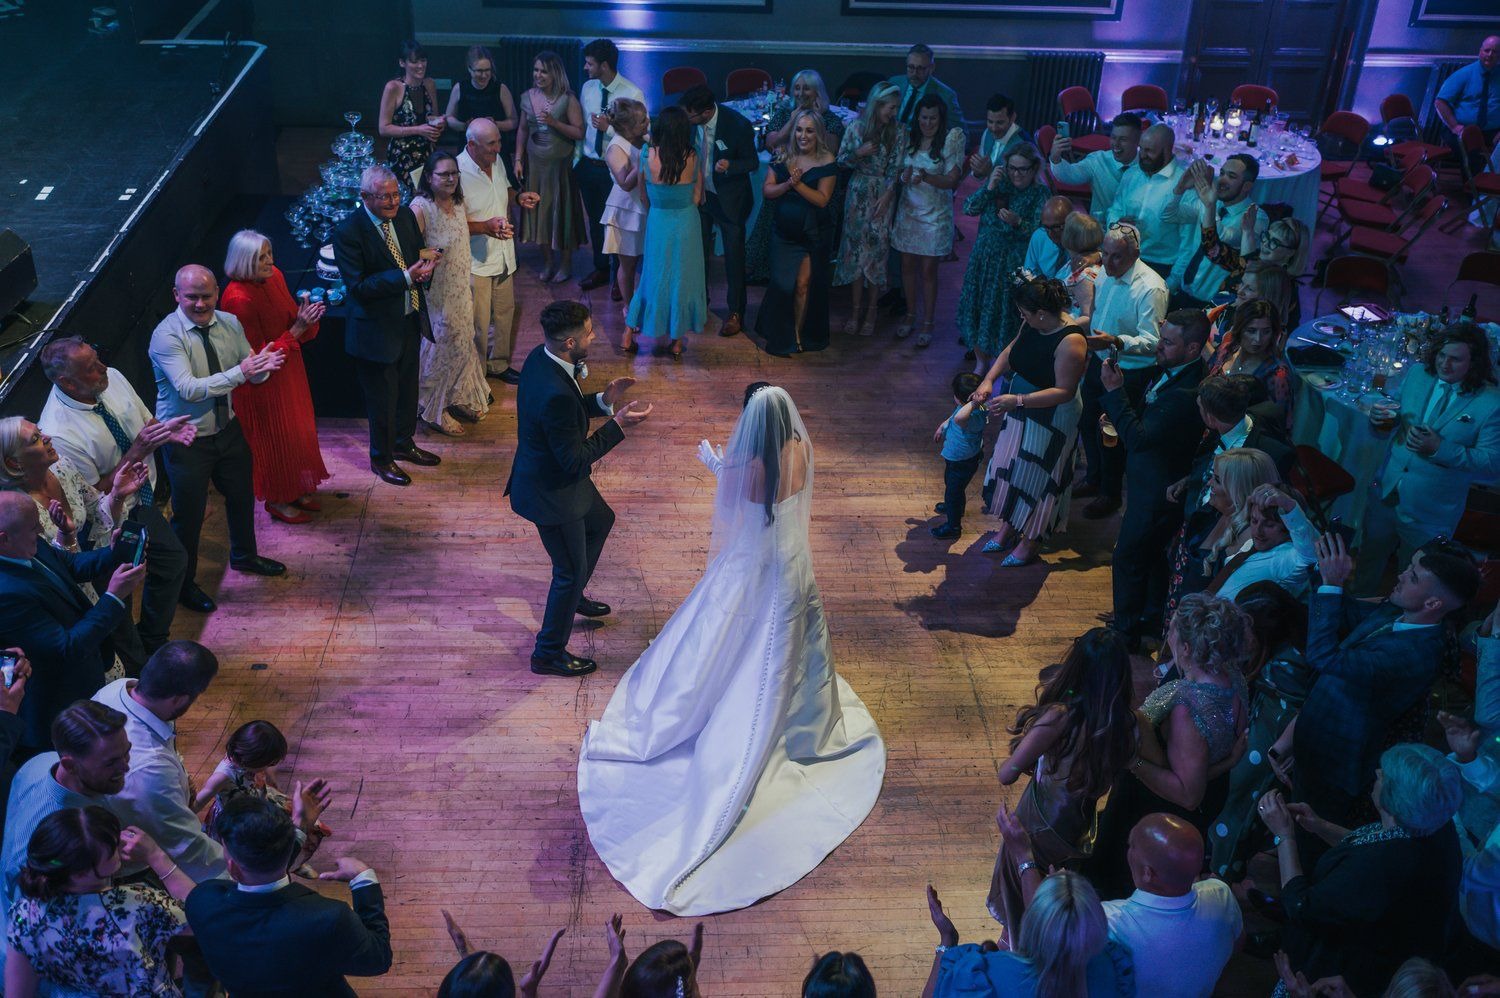 Elizabeth and Aaron danced the night away with their 200 friends and family